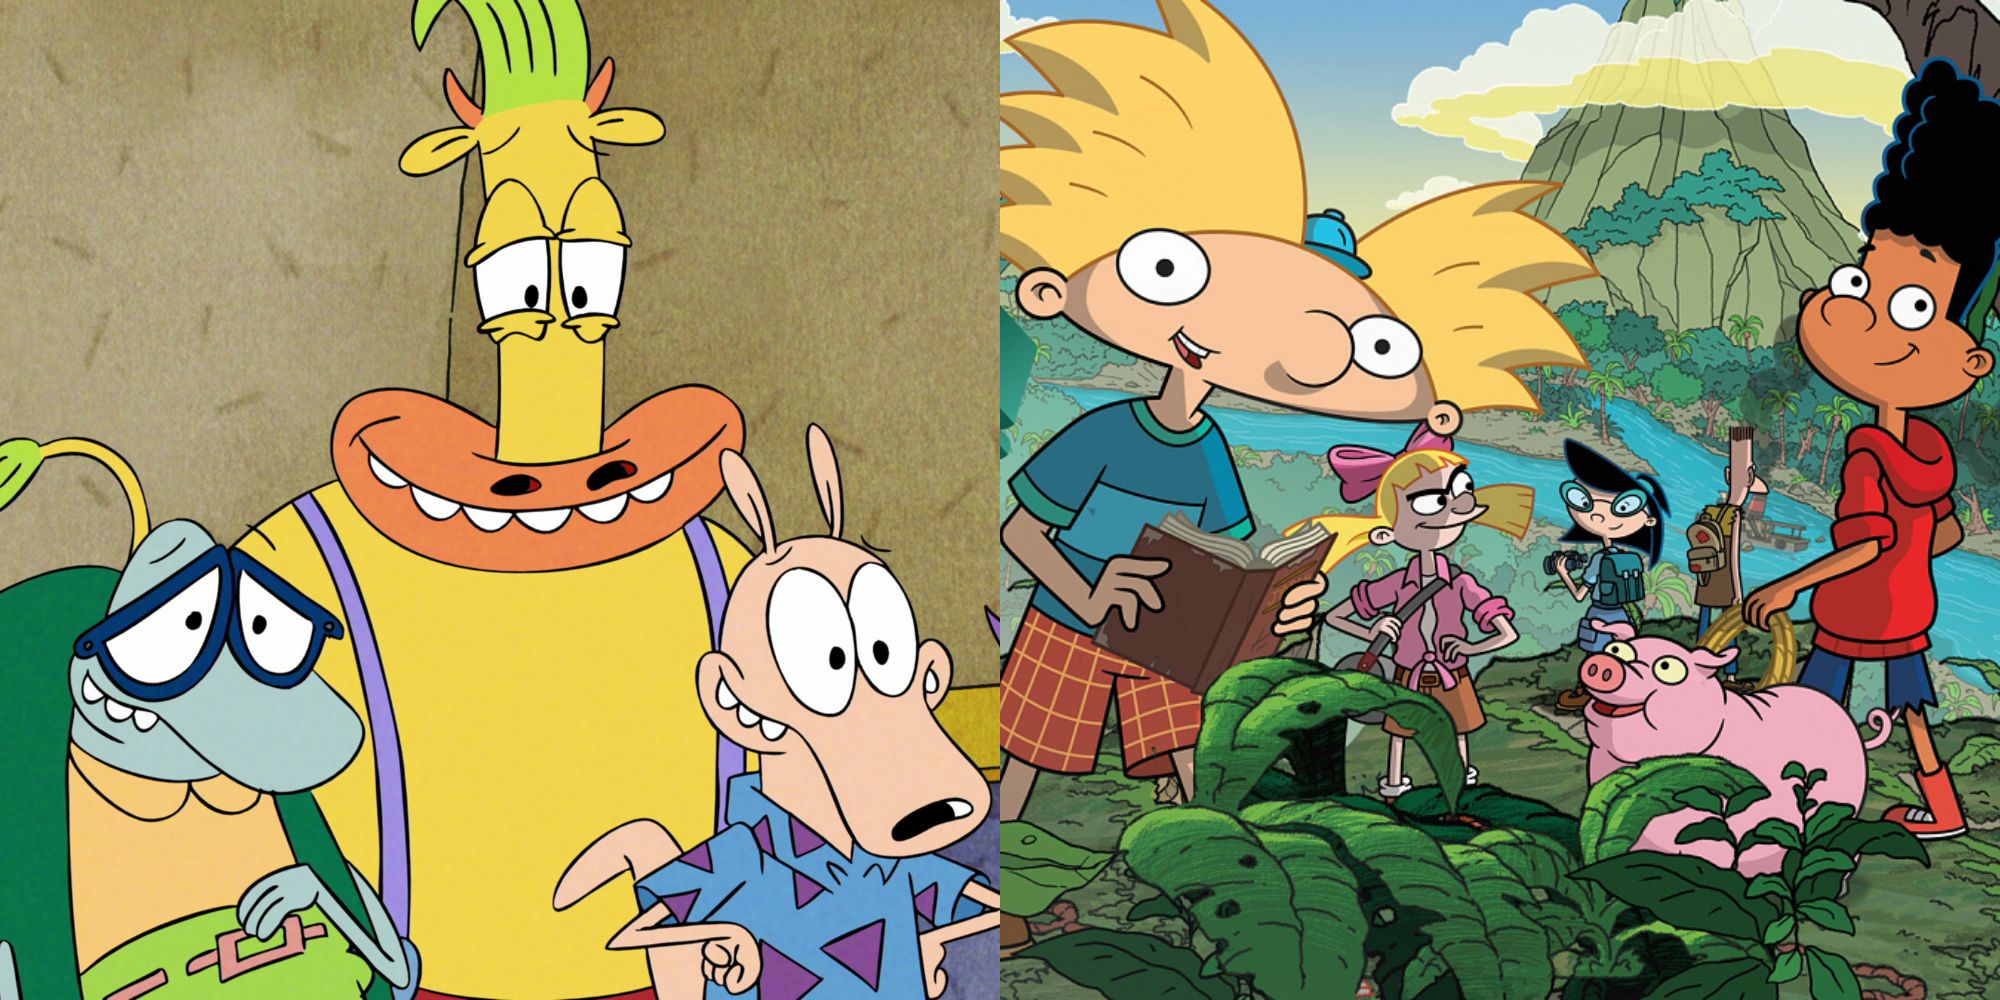 Split image showing characters from Rocko's Modern Life Static Cling and Hey Arnold! The Jungle Movie.